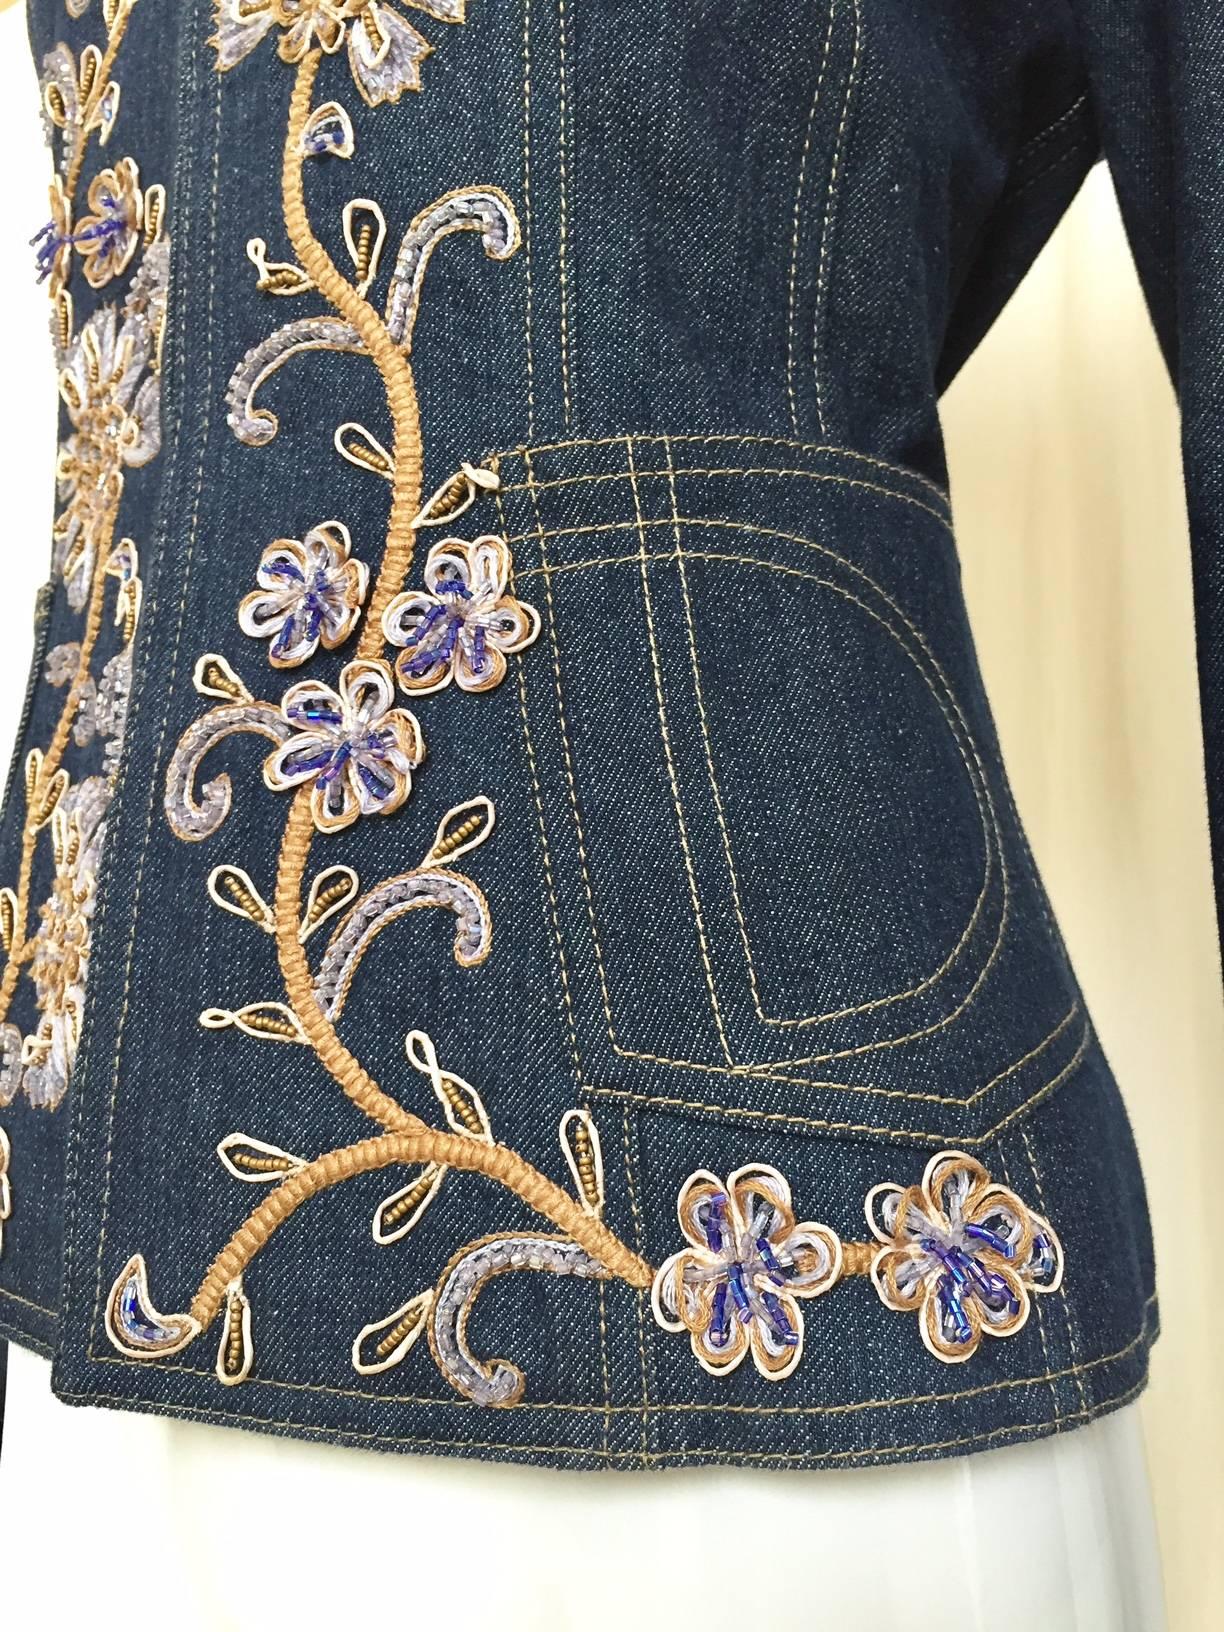 Christian Dior by John Galliano denim embroidered fitted jacket.
B: 36"/ W: 31"/ Hip: 39"/ Sleeve length: 25"/ Jacket length: 21"
Jacket is in excellent condition lined in silk.